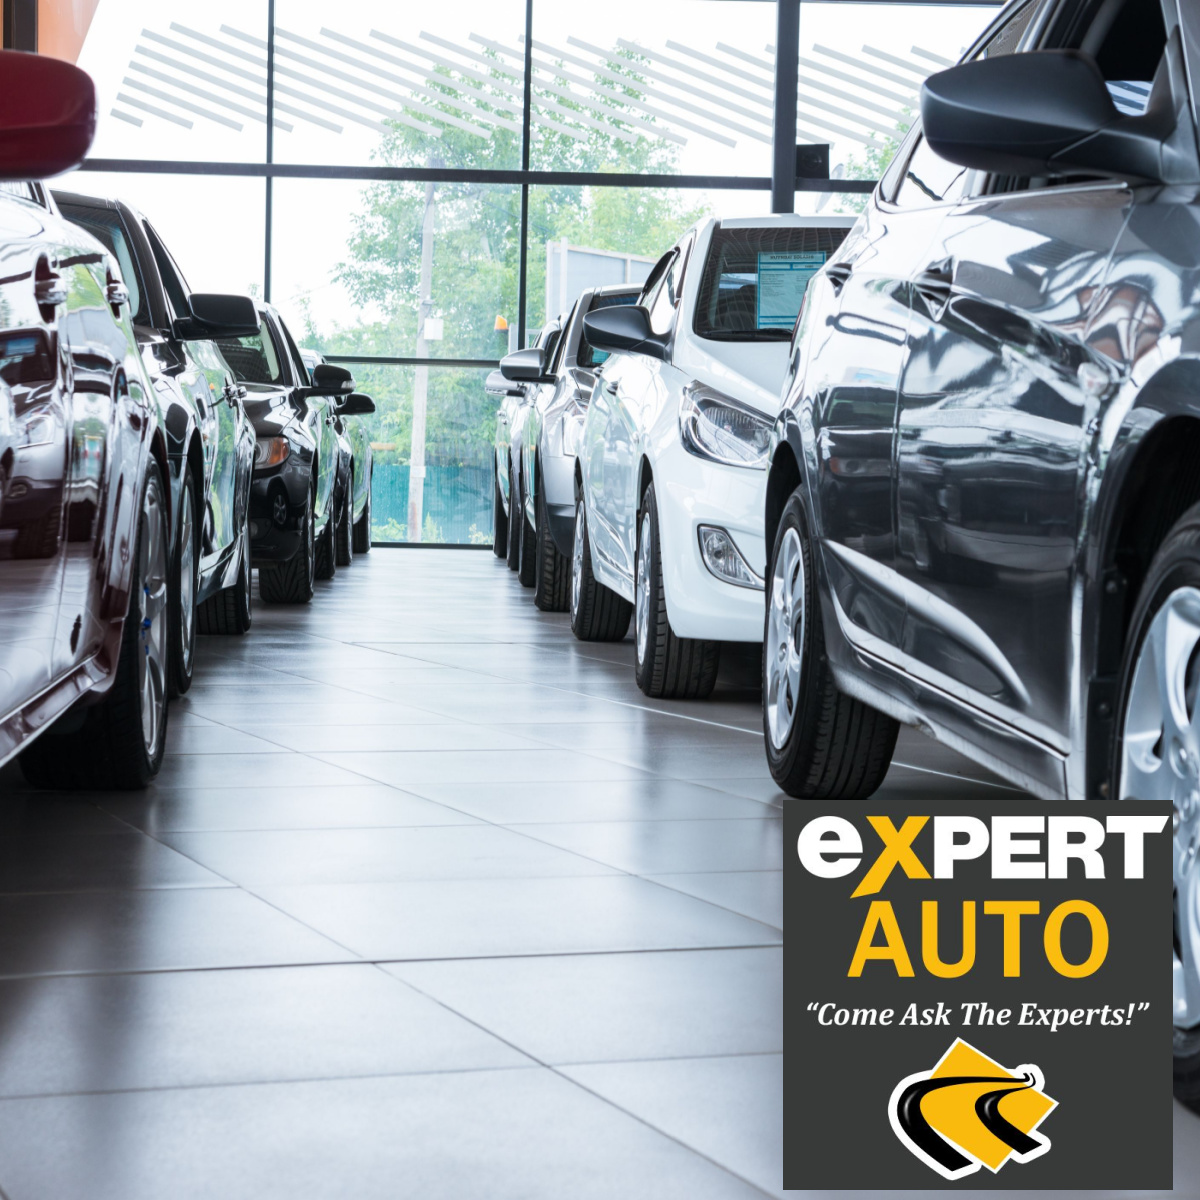 Expert Auto Is The Used Car Dealership Near Coral Hills You Need